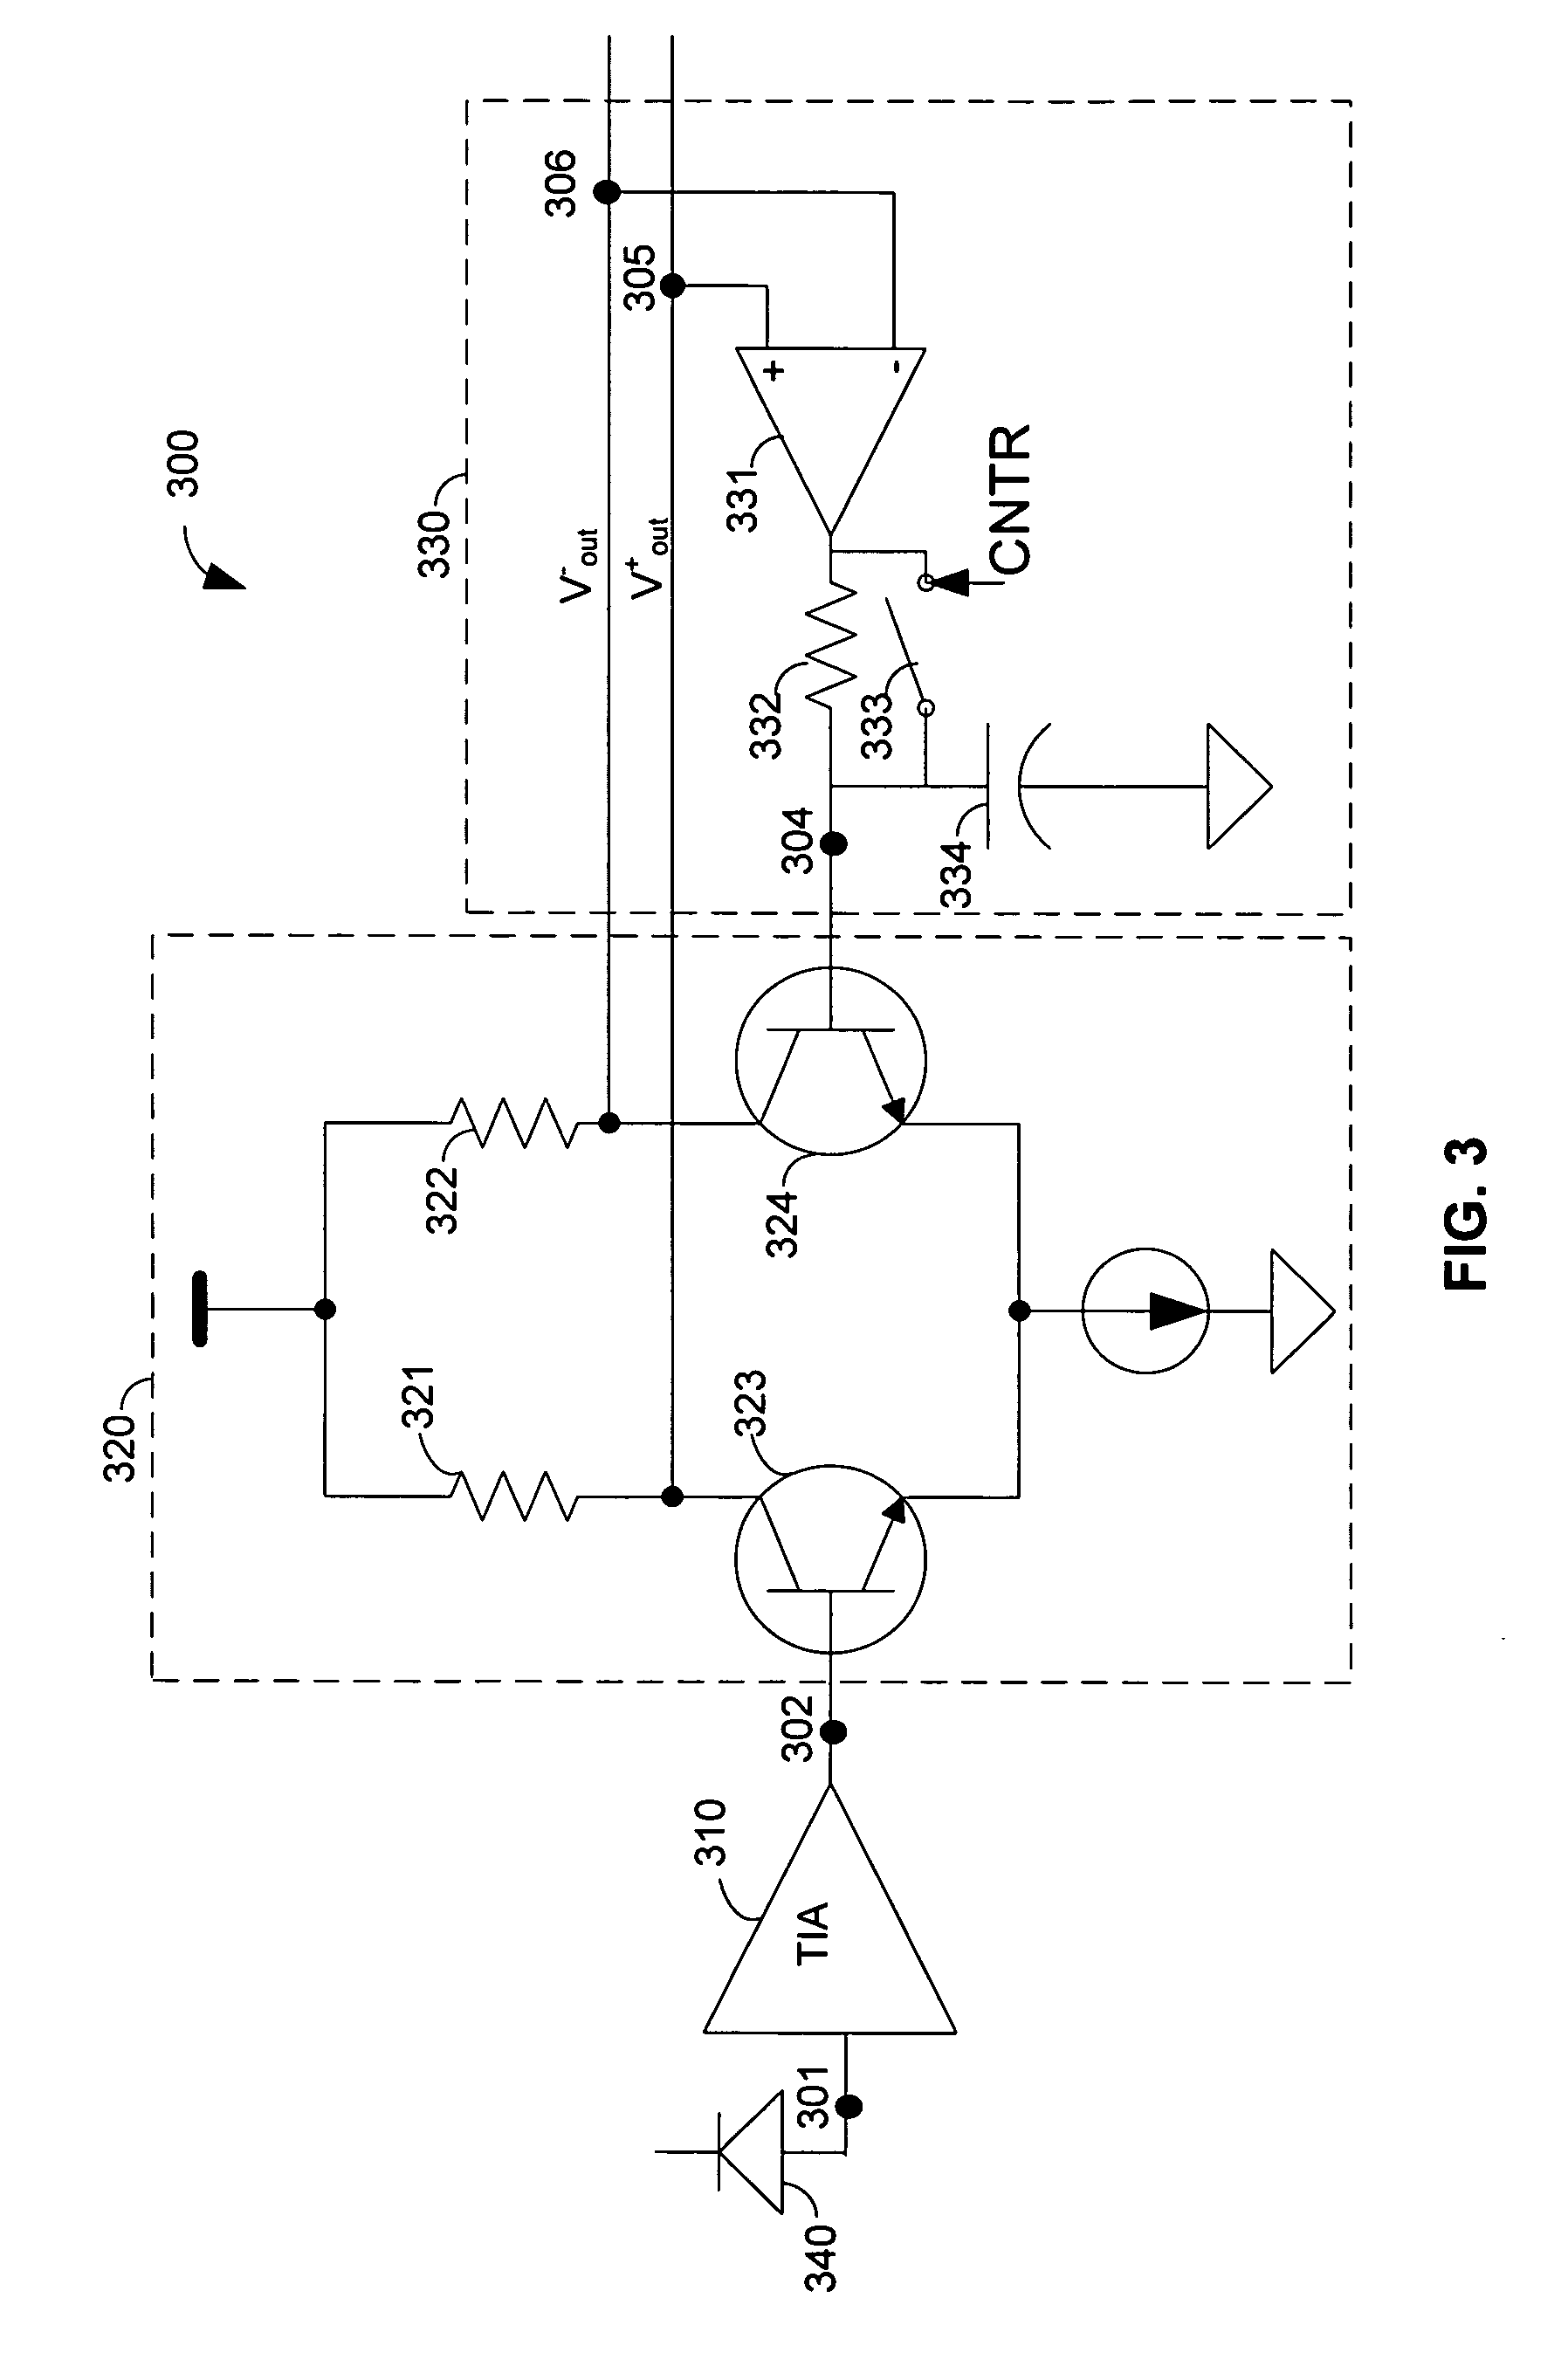 Transimpedance (TIA) circuit usable for burst mode communications